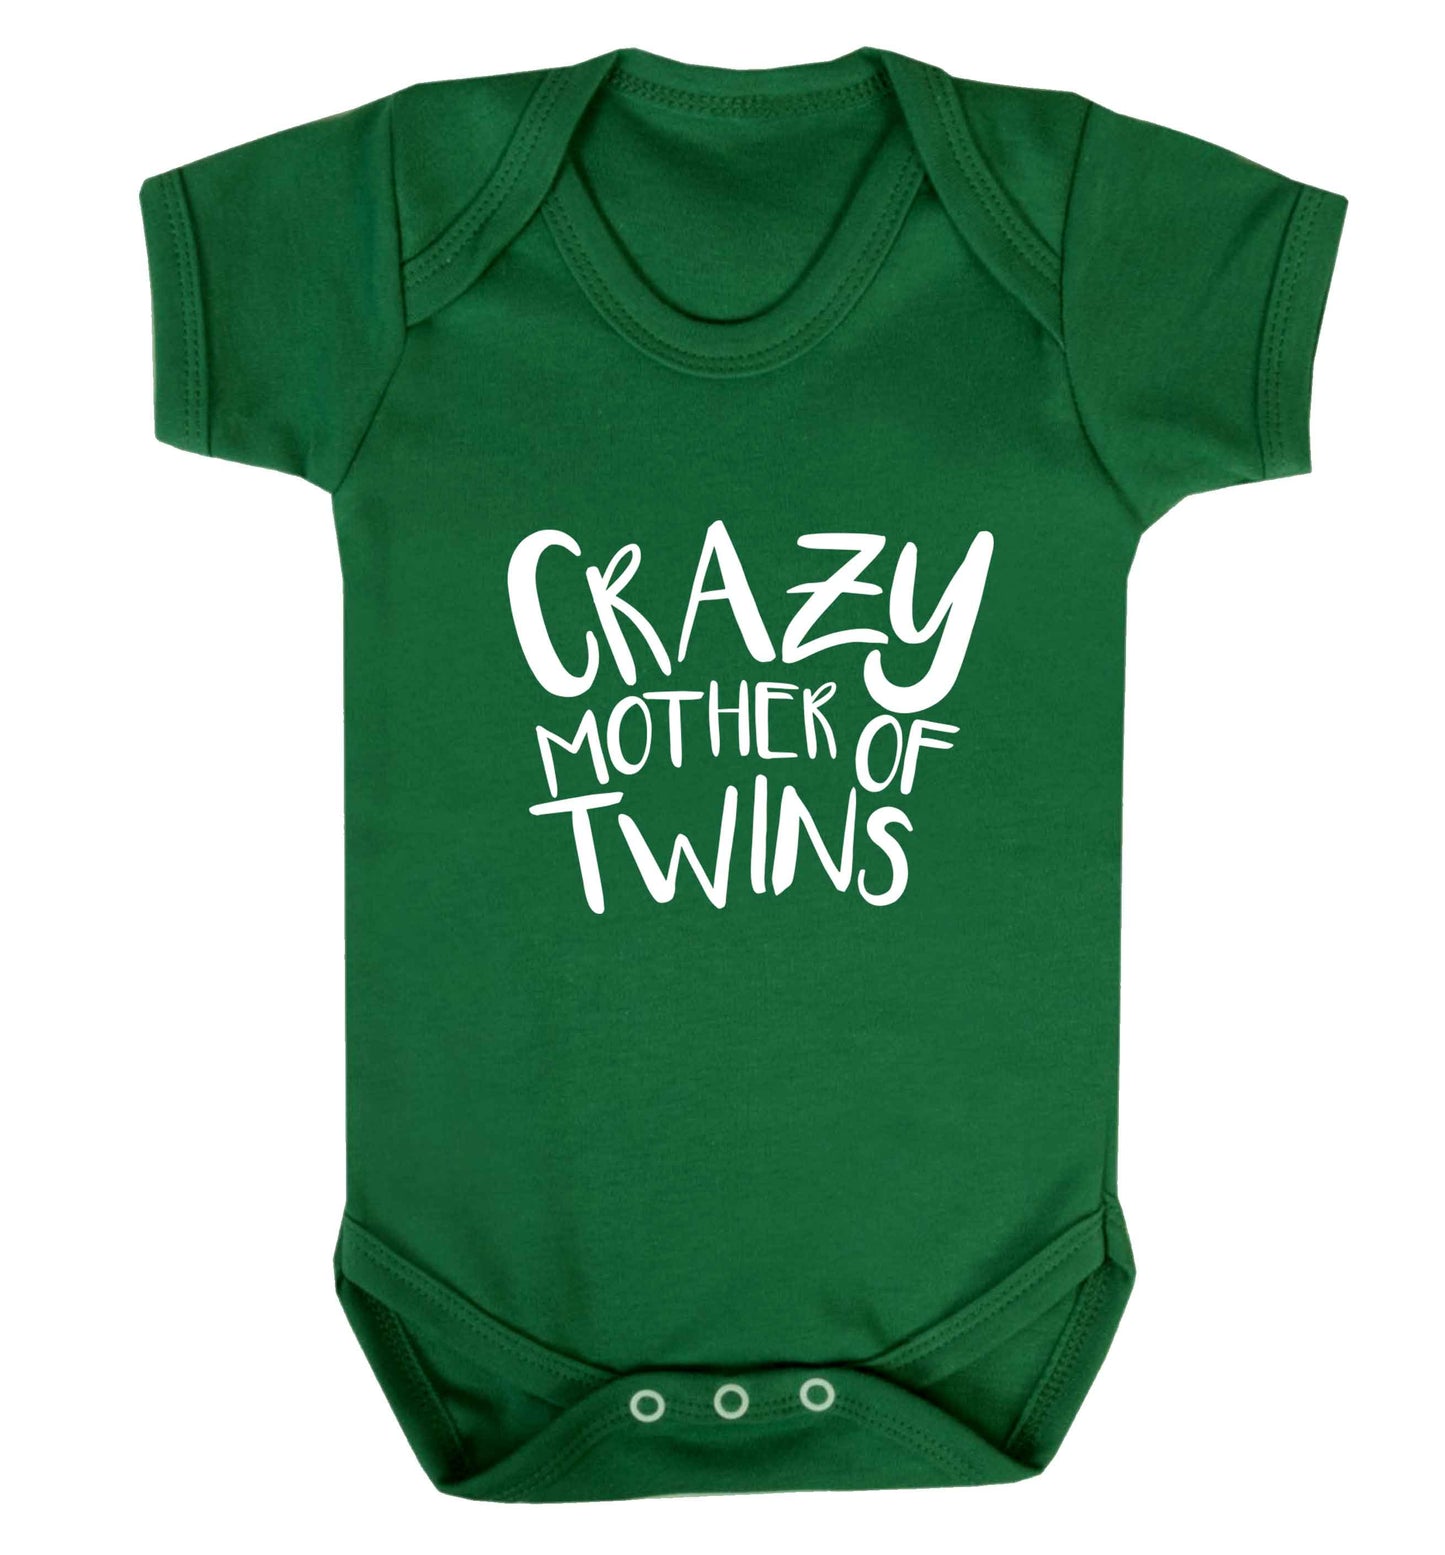 Crazy mother of twins baby vest green 18-24 months